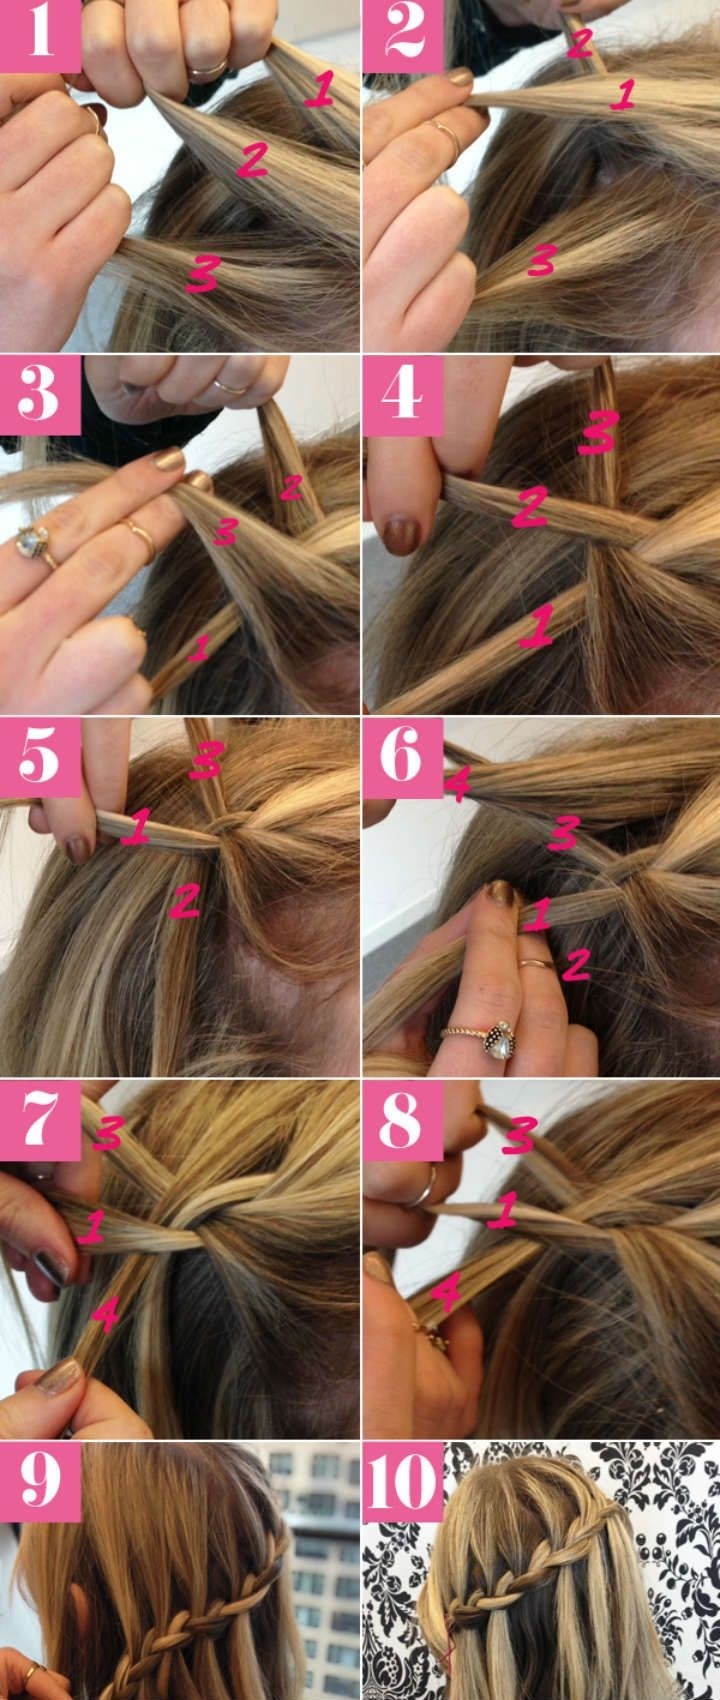 How to Do a Waterfall Braid: Easy Braided Hairstyles Tutorial